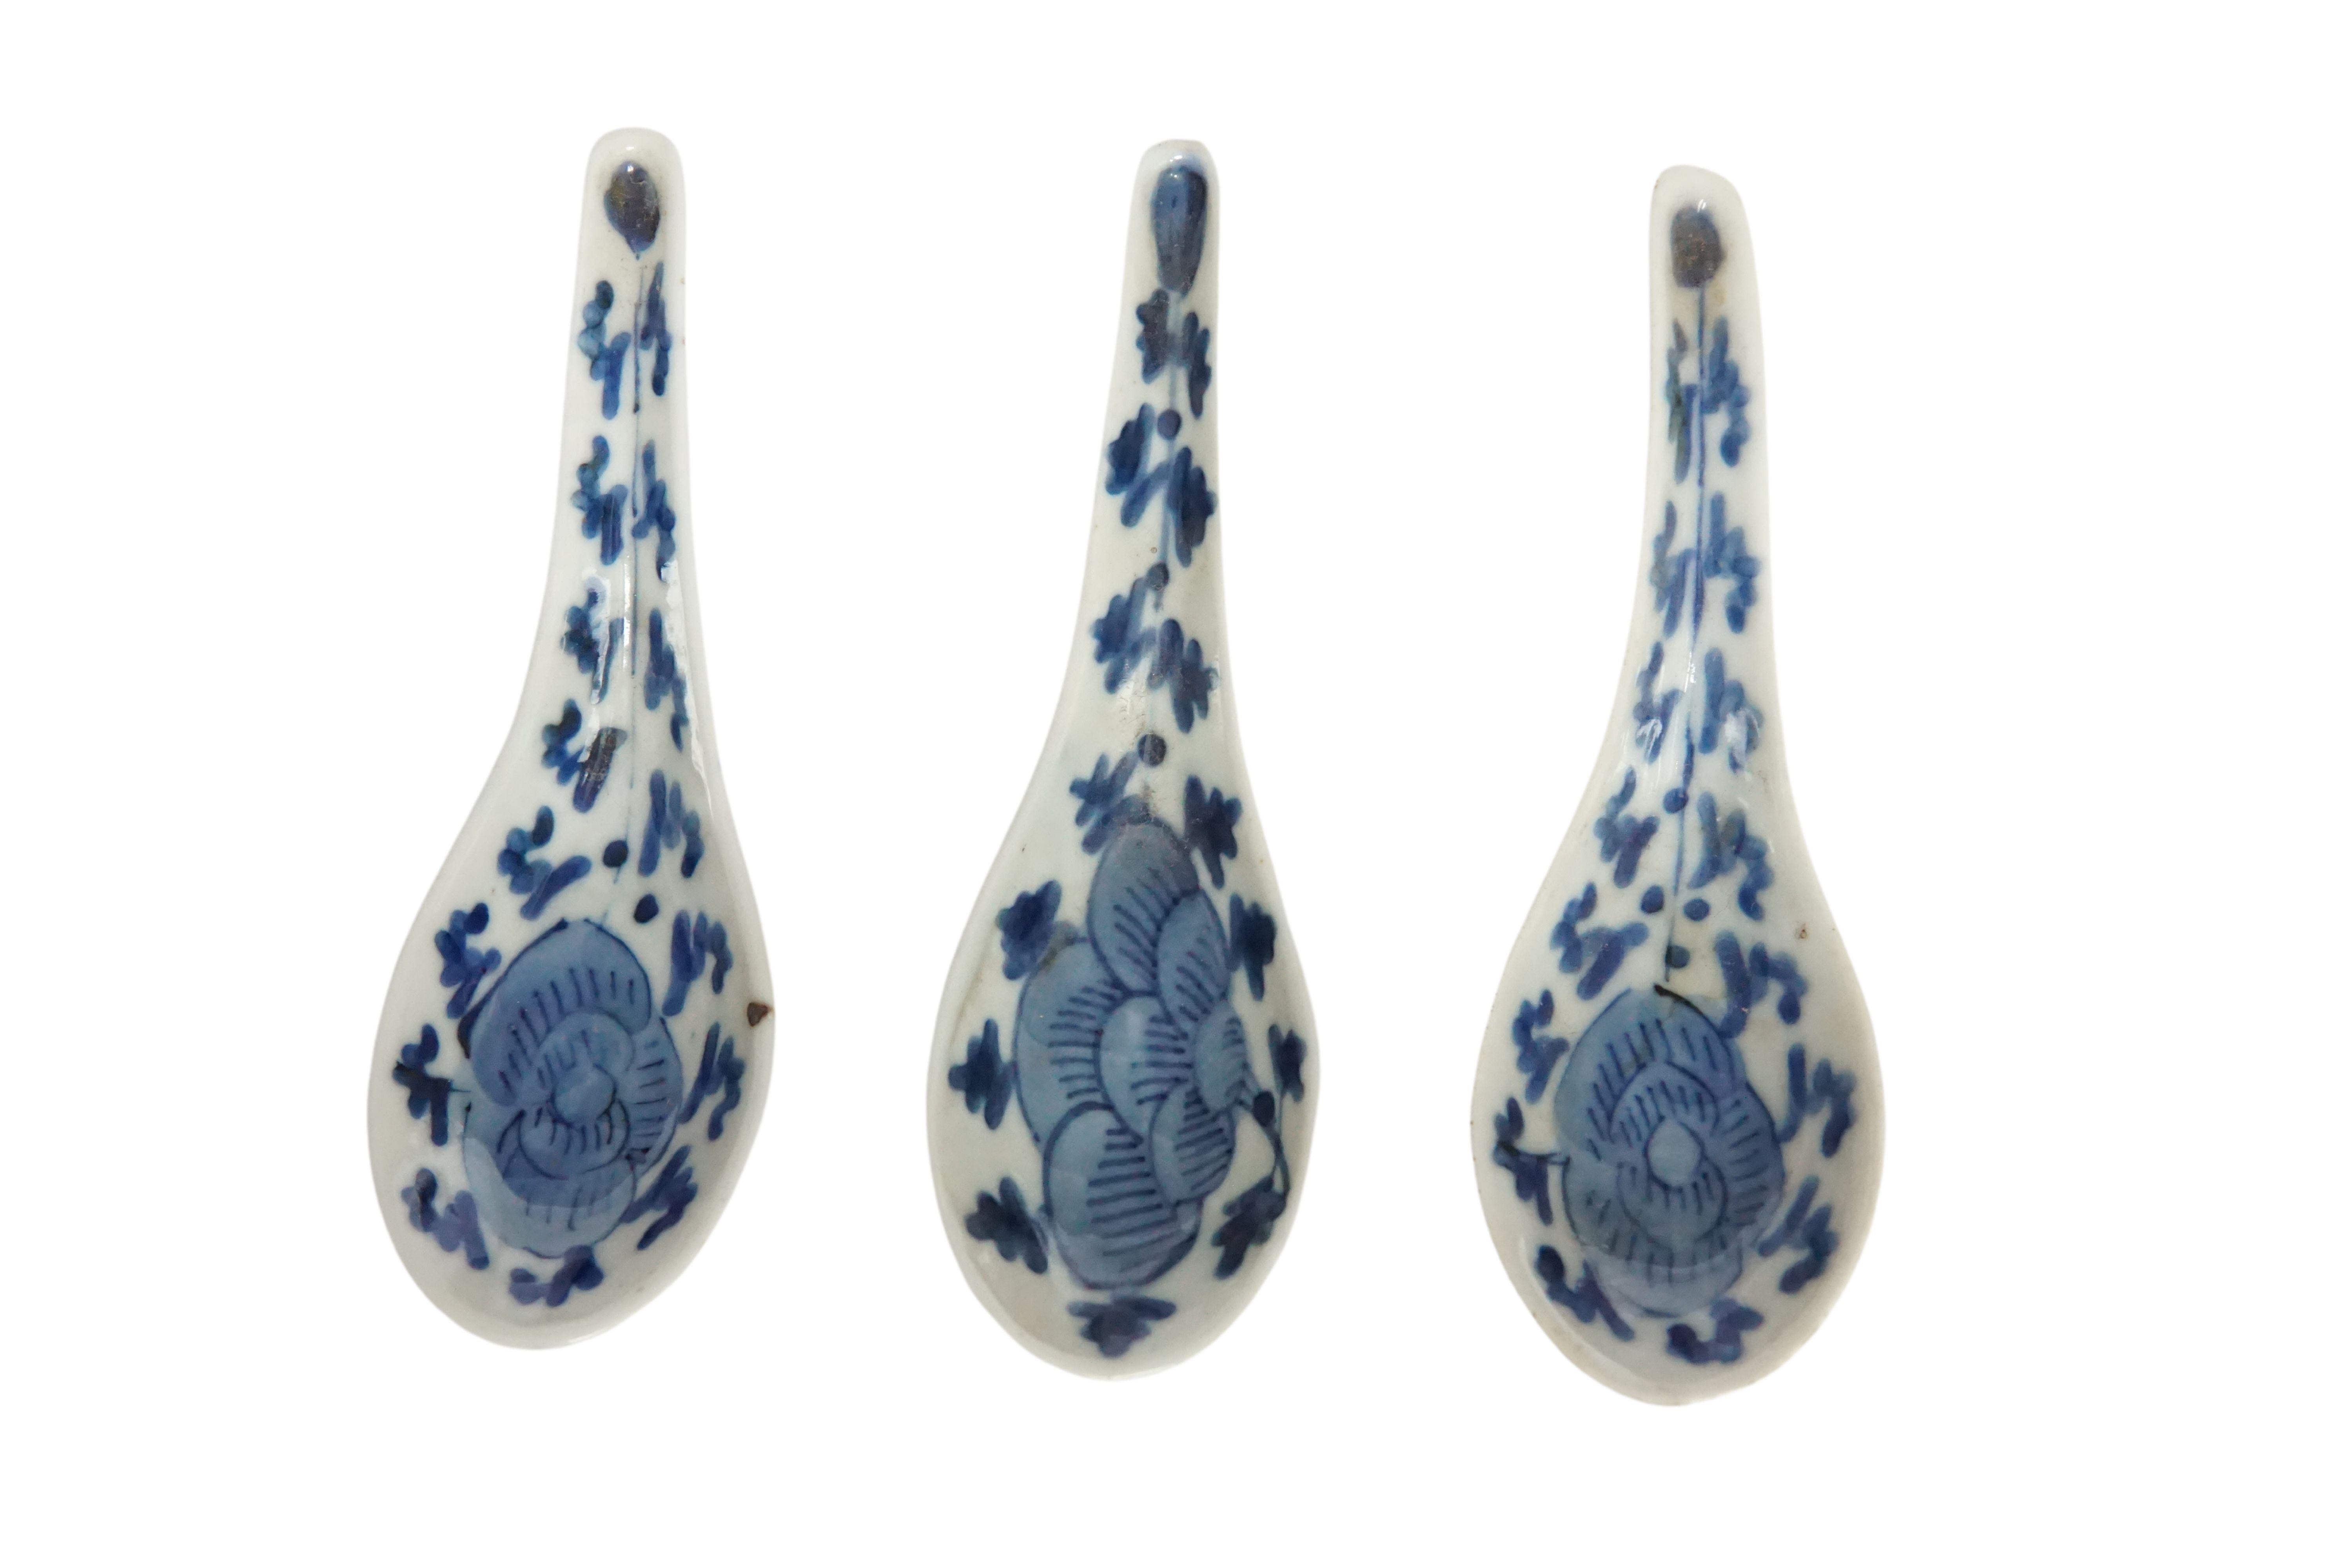 A set of 3 wonderfully hand-painted Chinese blue & white ceramic spoons circa 1850. They bear a floral pattern design and beautiful, sculptural shape. A great piece of Chinese History. 
 